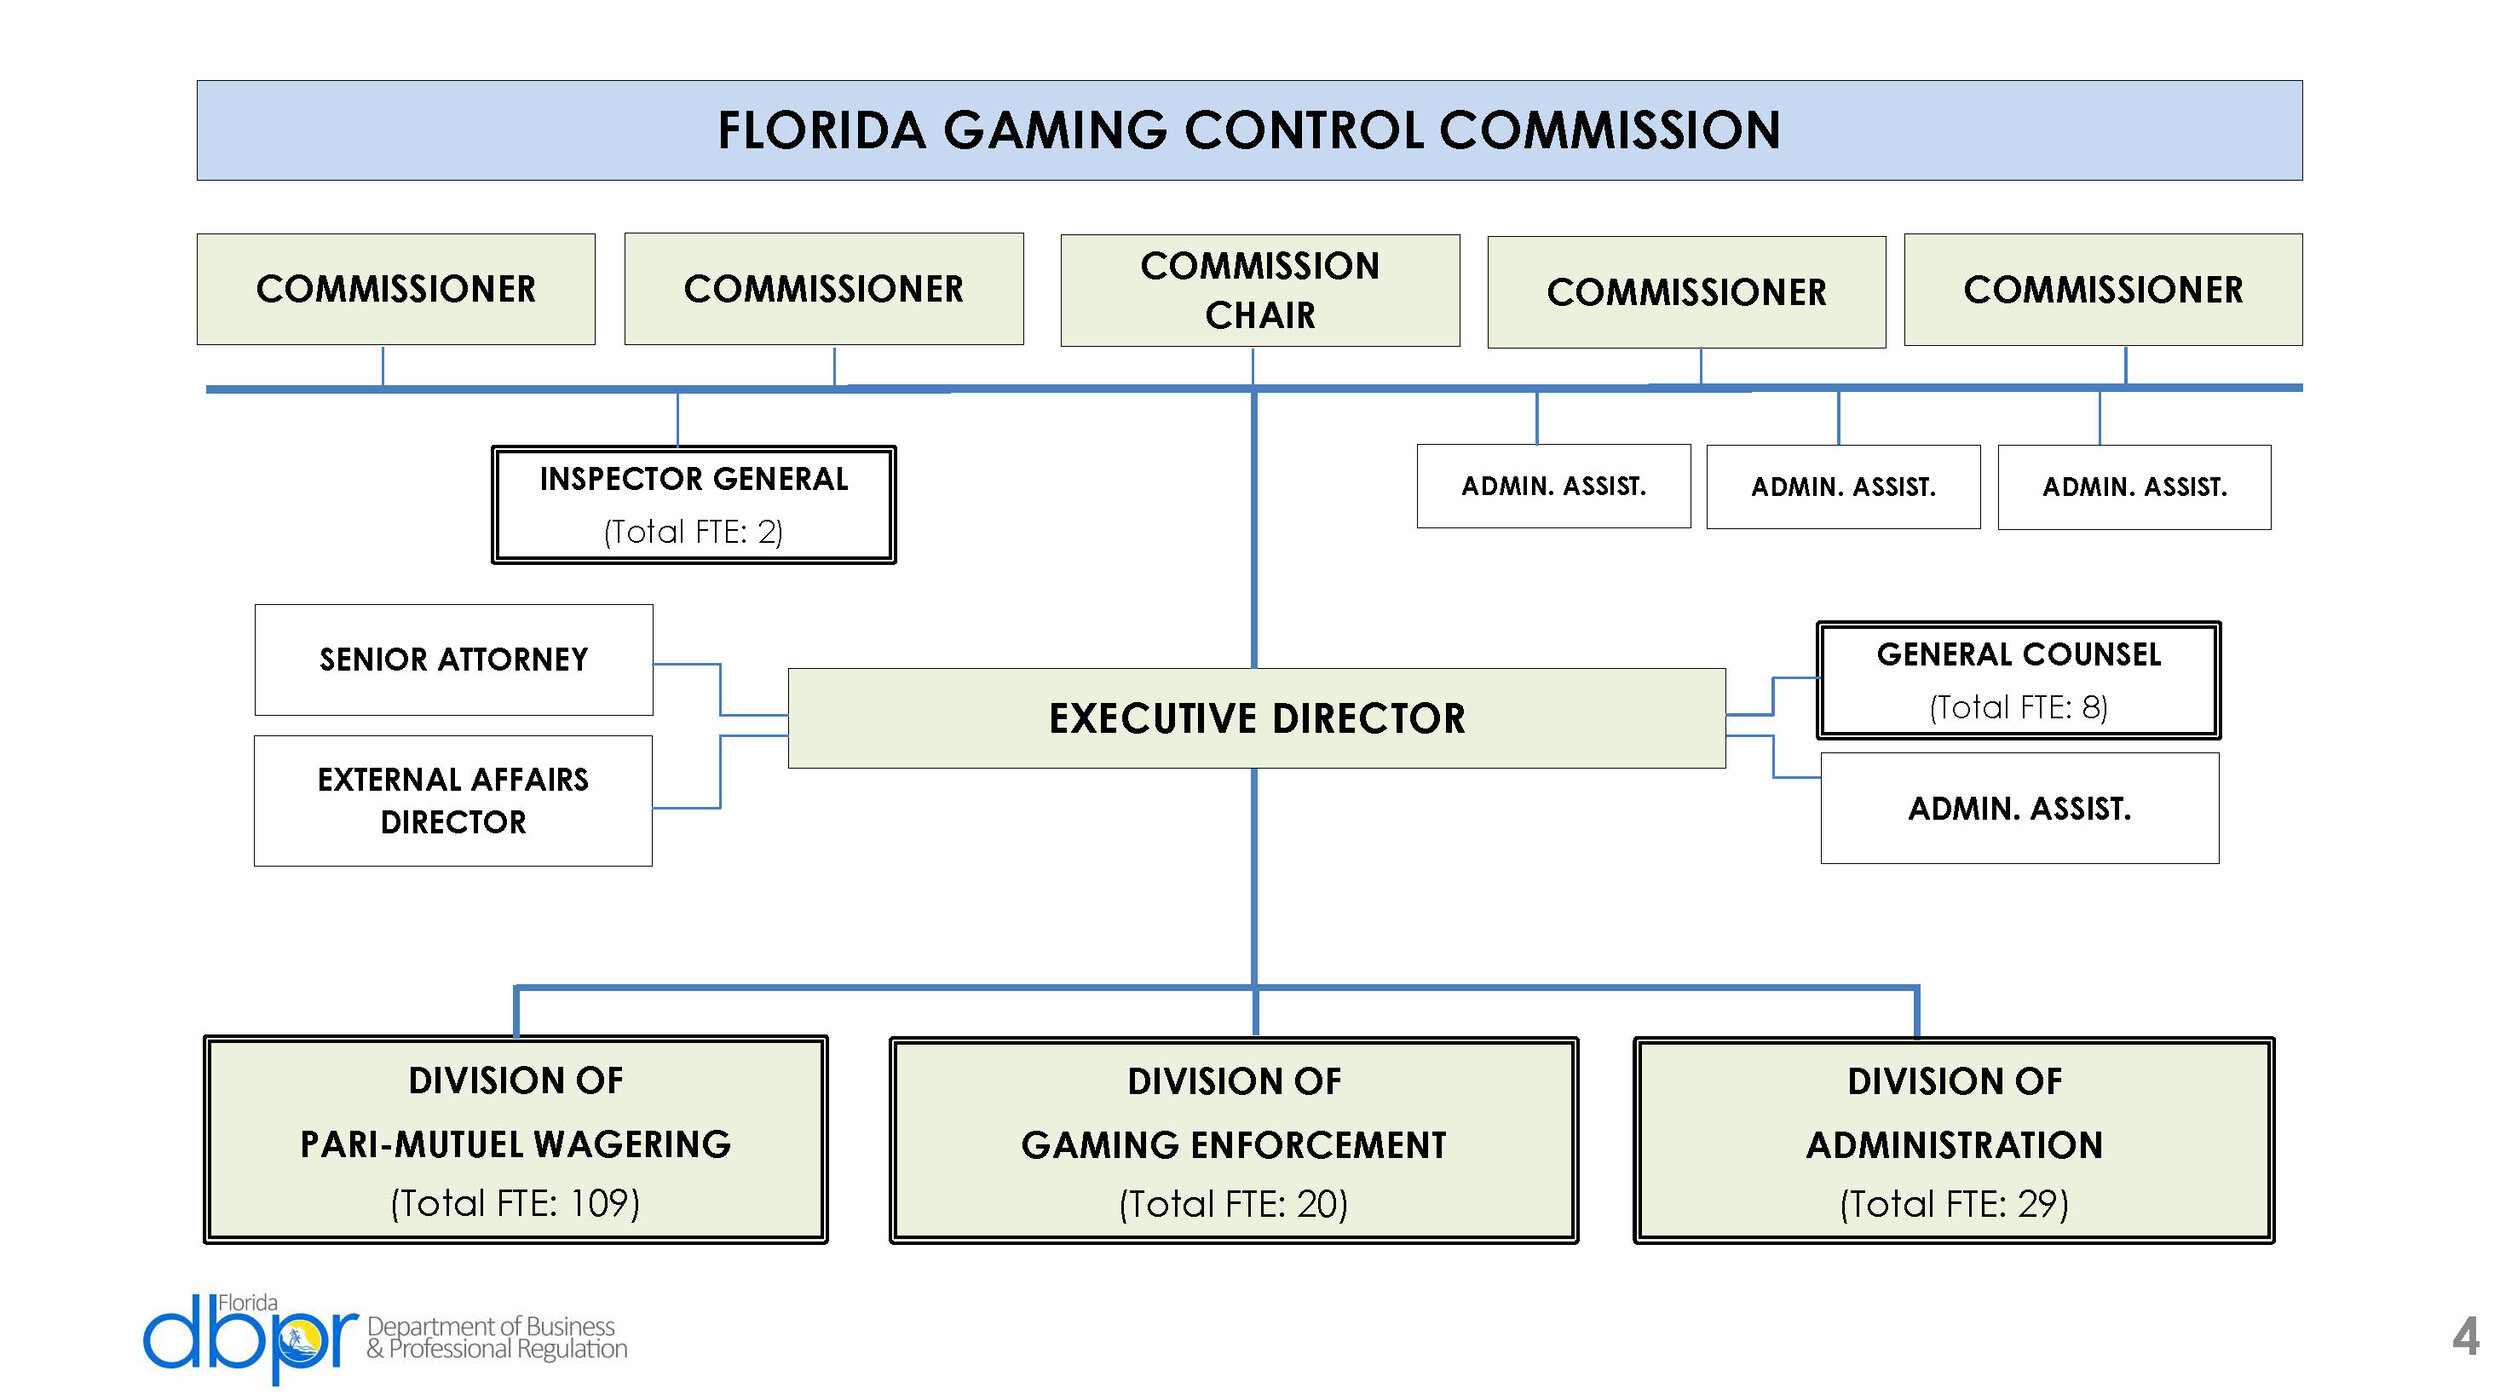 Florida Gaming Control Commission LBR 22-23_Page_04.jpg